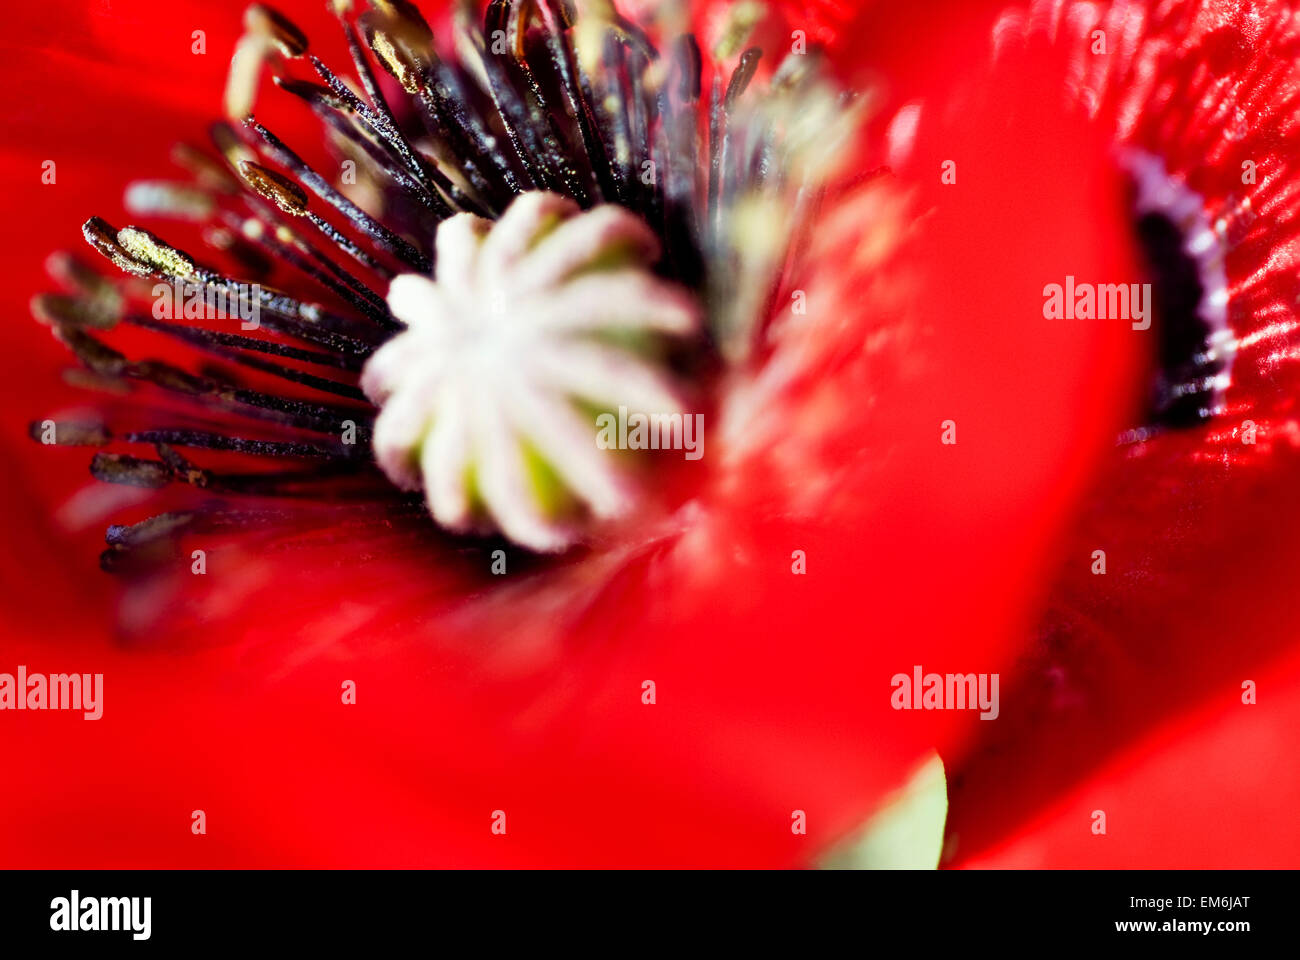 Potentilla Gibson's Scarlet, Extreme Close-Up Of Bright Red Blossom. Stock Photo